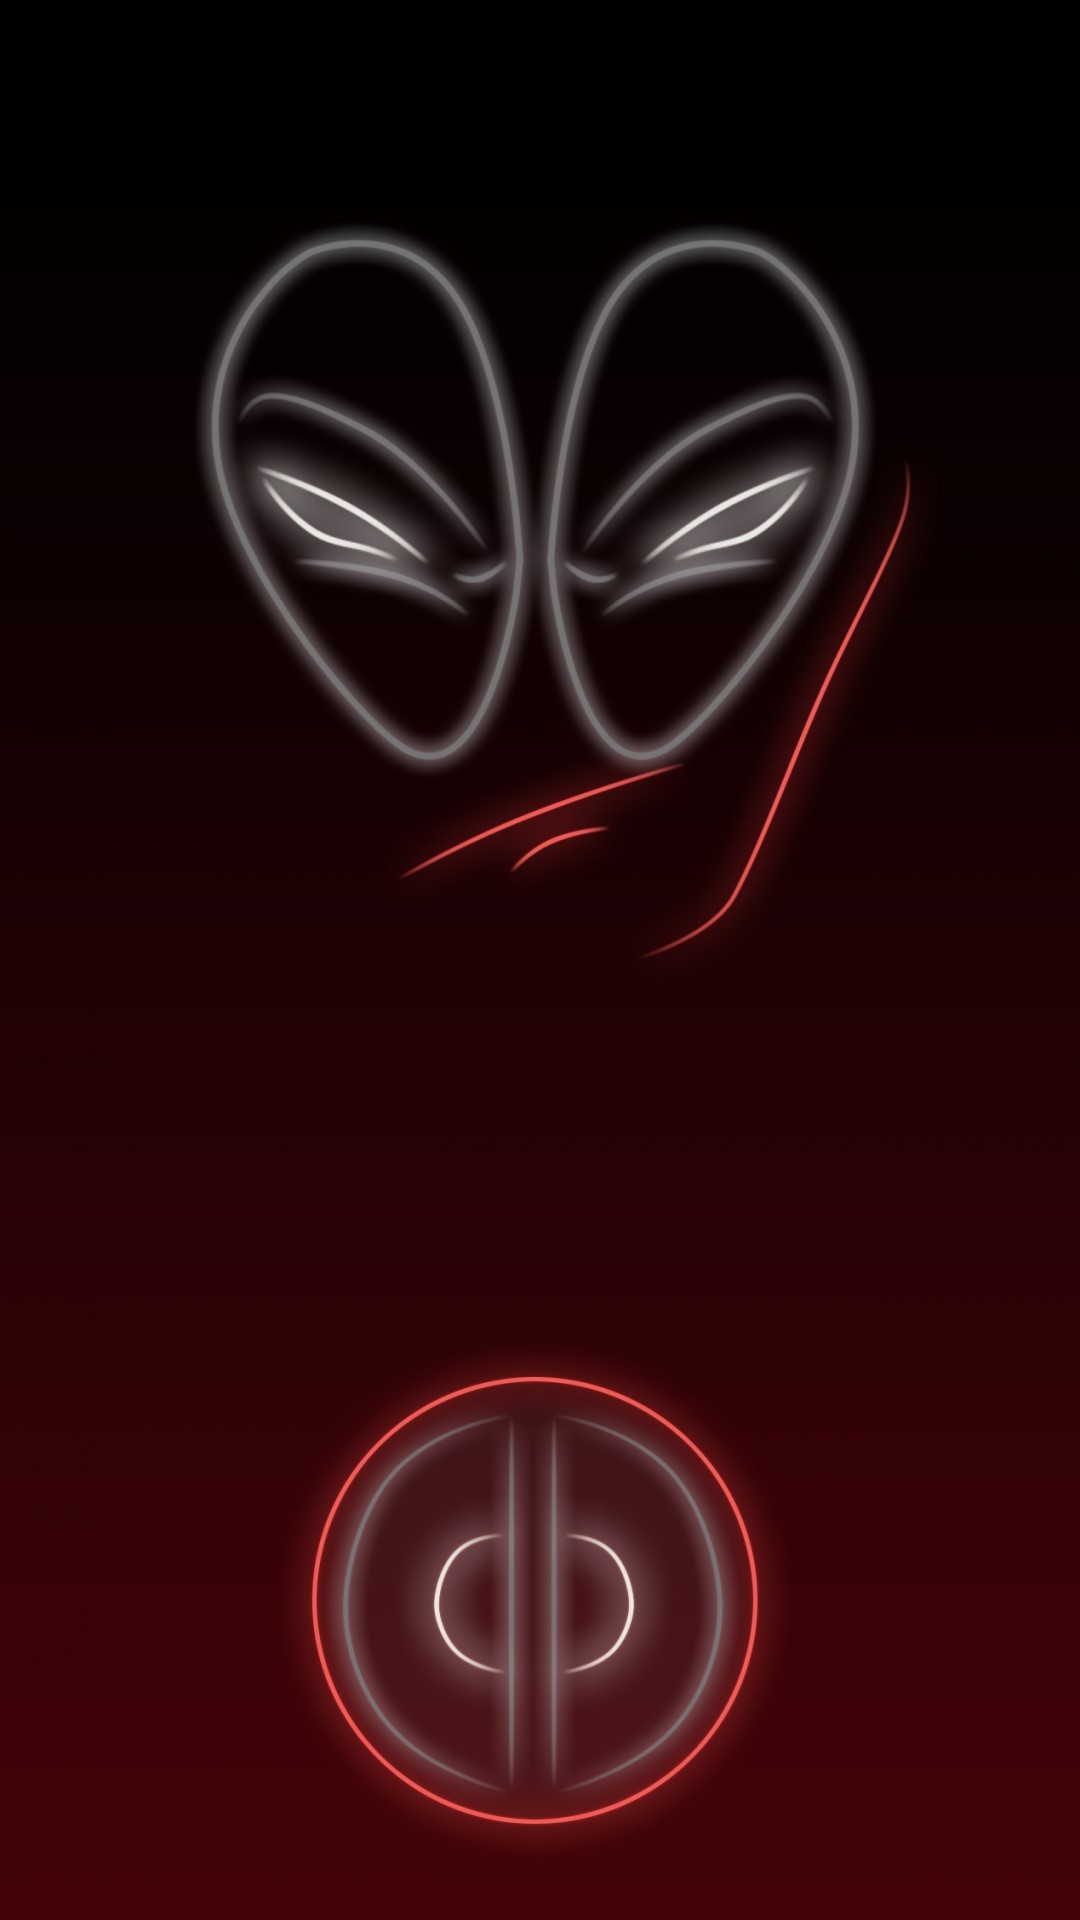 1080x1920 Deadpool-Tap-to-see-more-Superheroes-Glow-With-